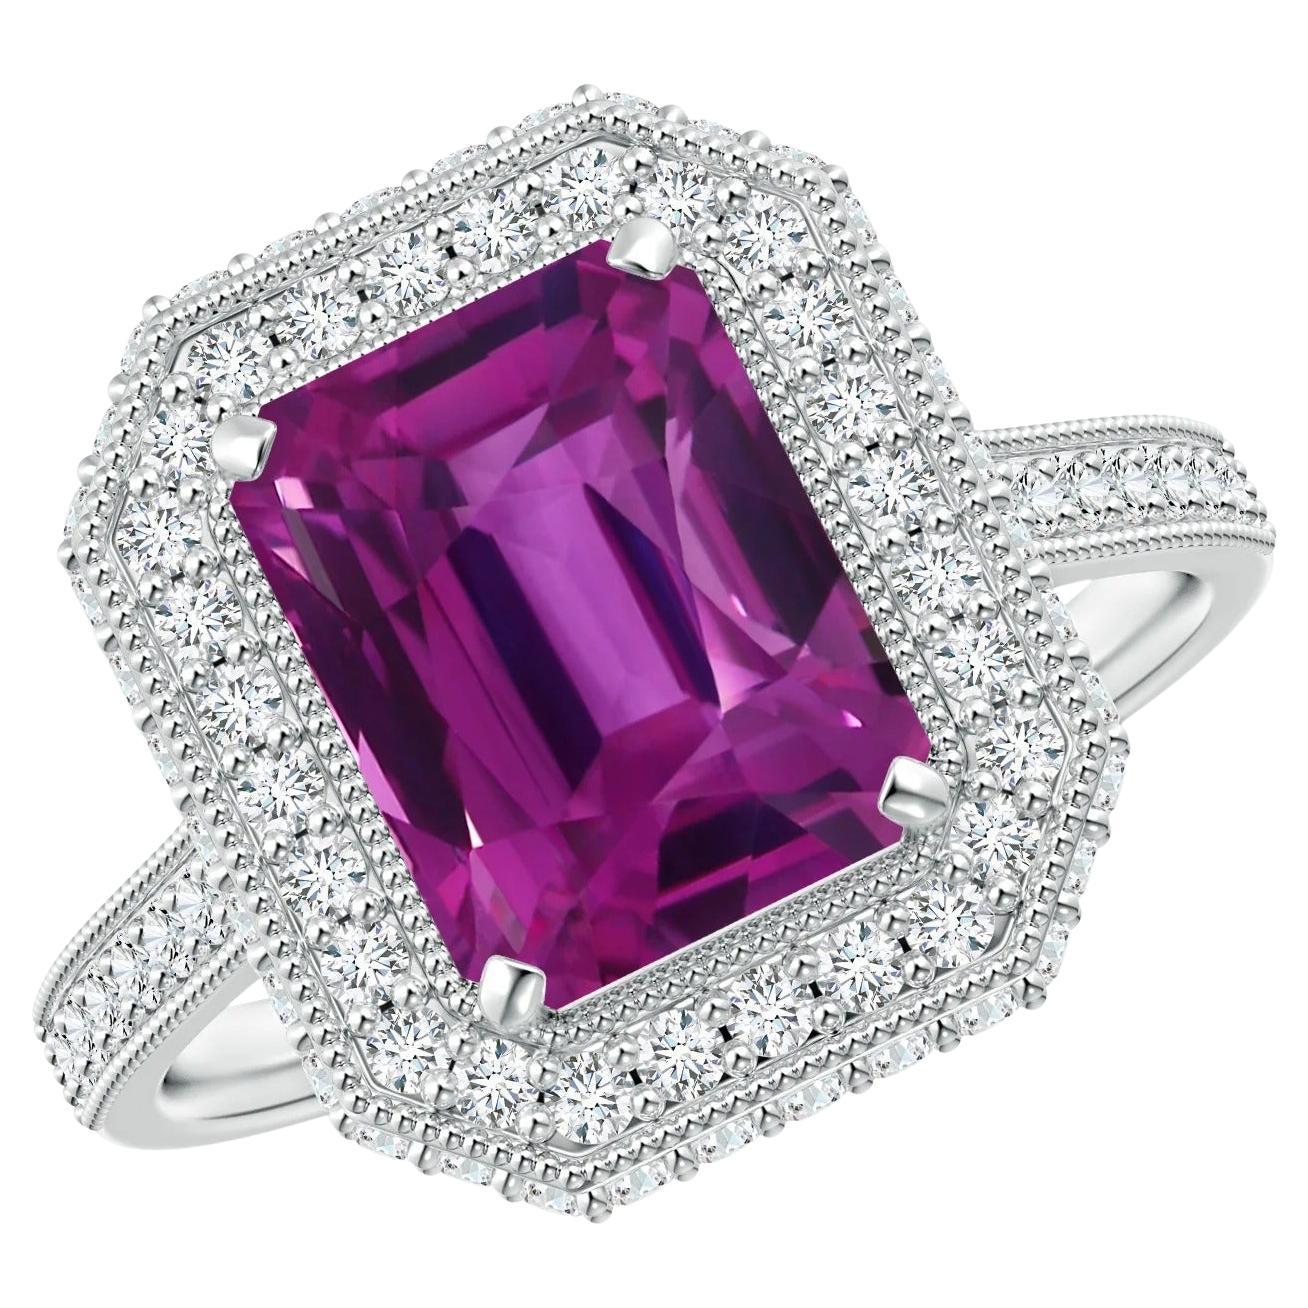 Angara Gia Certified Natural Emerald Cut Pink Sapphire Halo Ring in Platinum